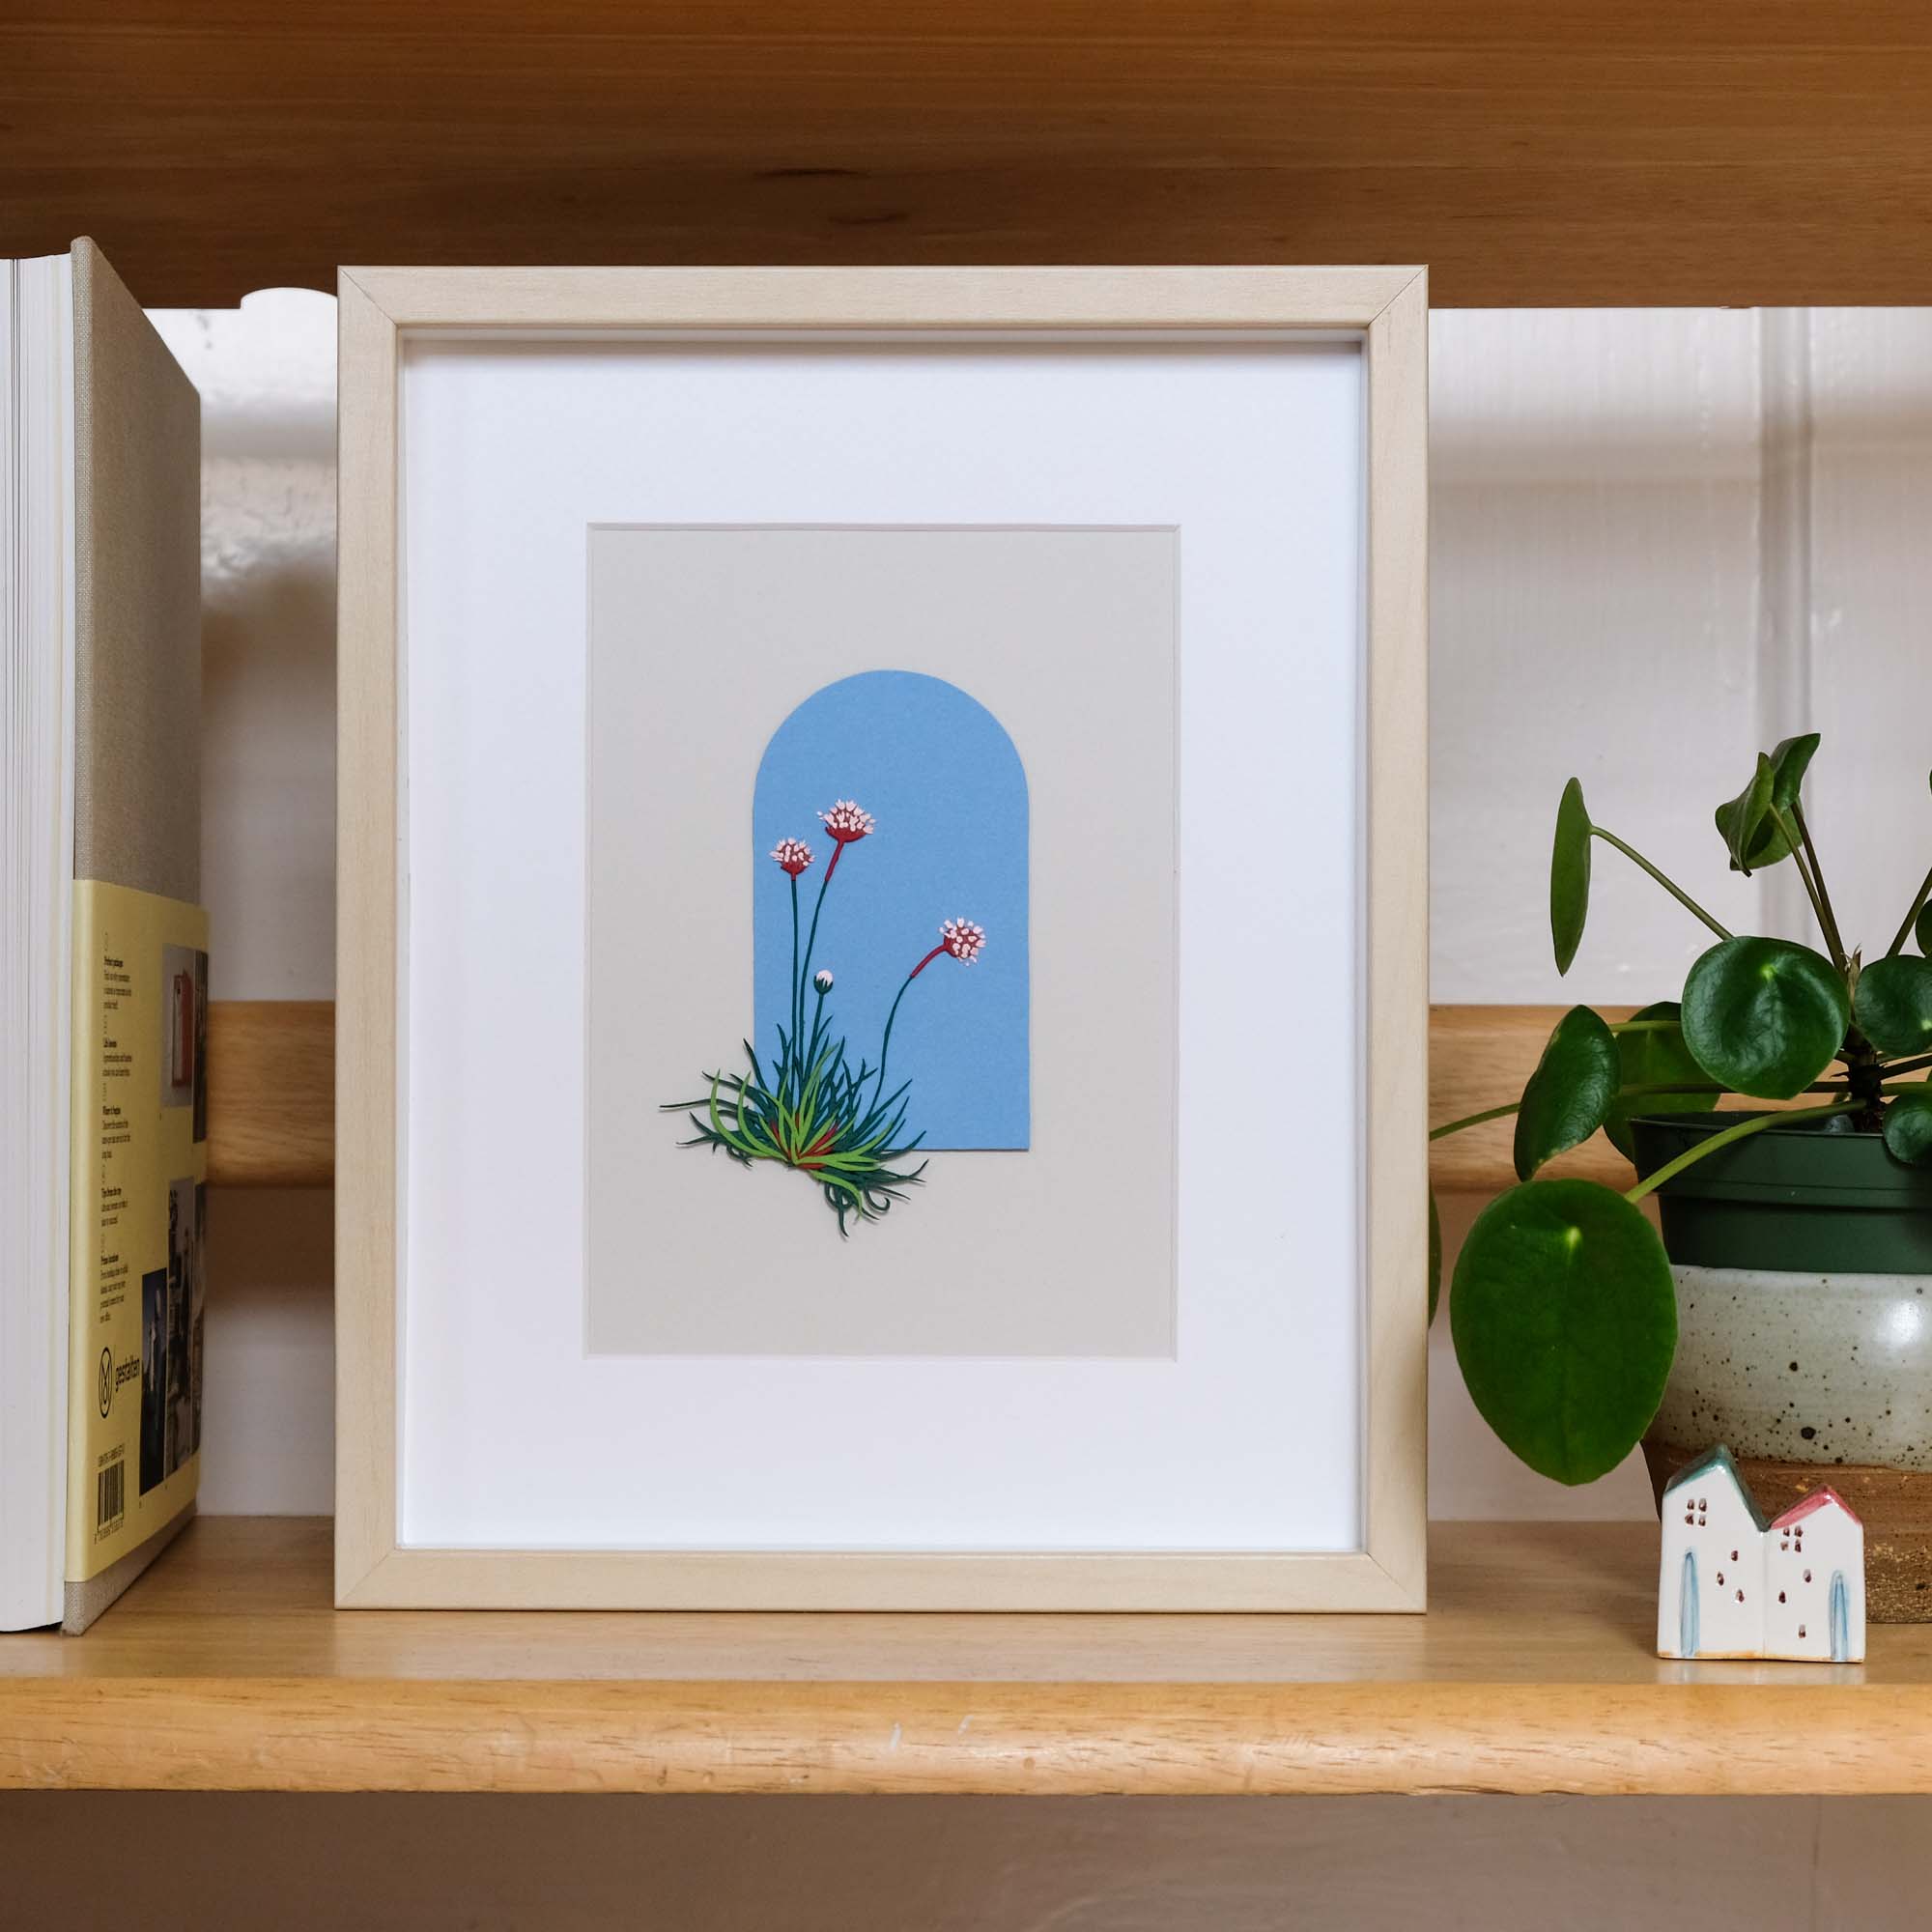 A framed copy of a few paper sea thrifts sits on a shelf with a book and a plant.